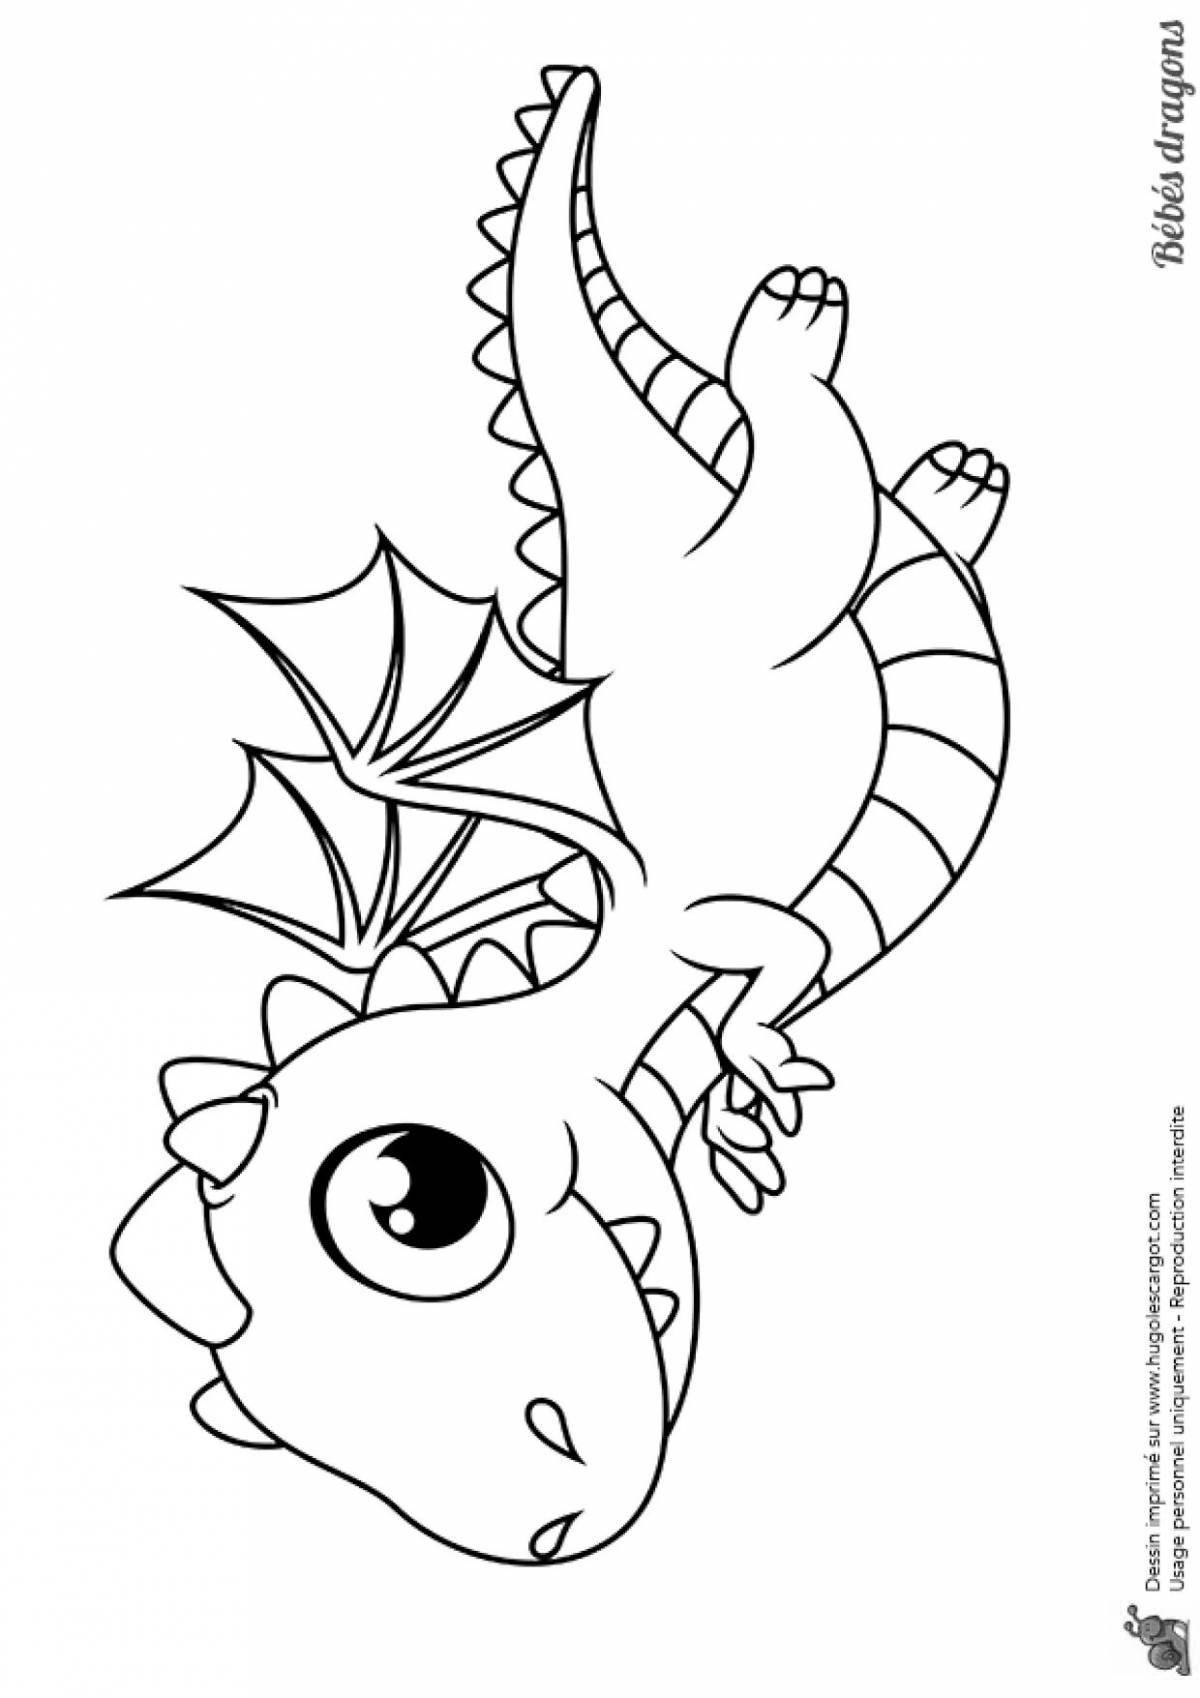 Lively cute dragon coloring book